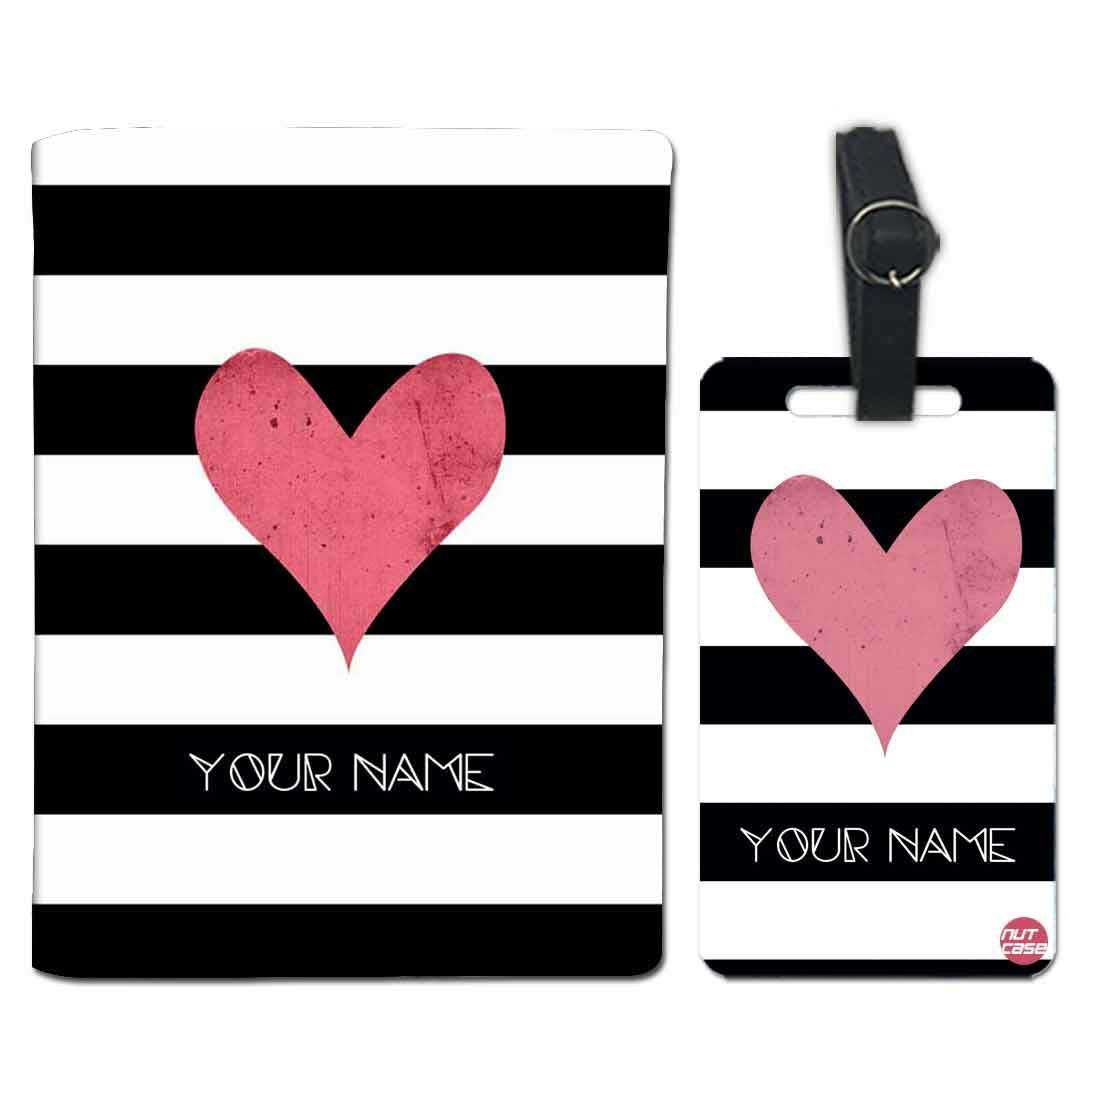 Classic Customized Passport Holder - Pink Heart With Strips